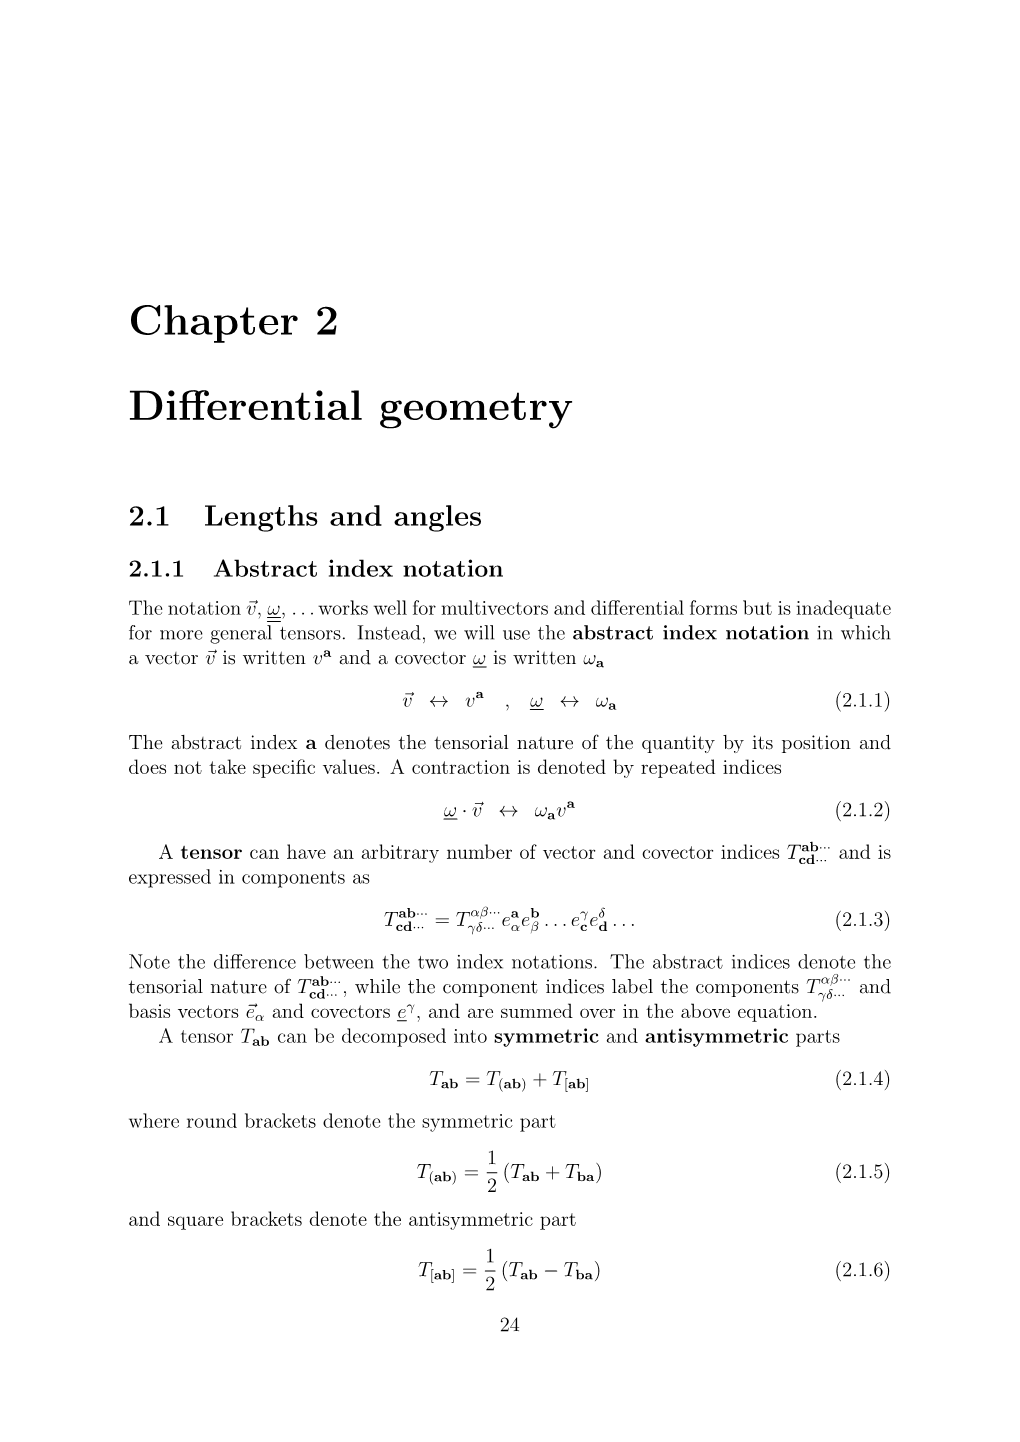 Chapter 2 Differential Geometry